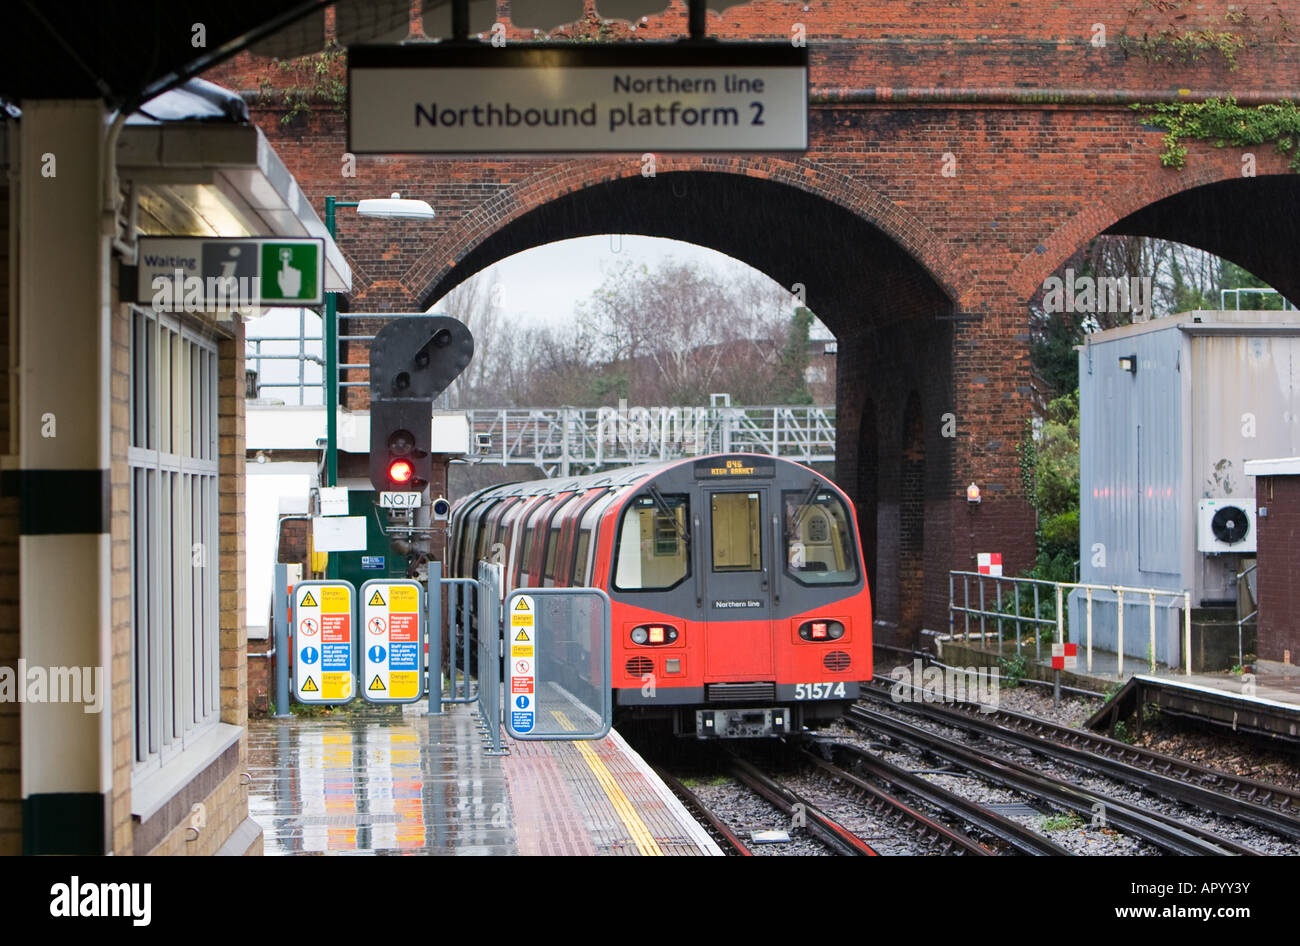 Northern Line train to High Barnet stops at Northbound platform 2 of Finchley Central in London UK December 6 2007 Stock Photo